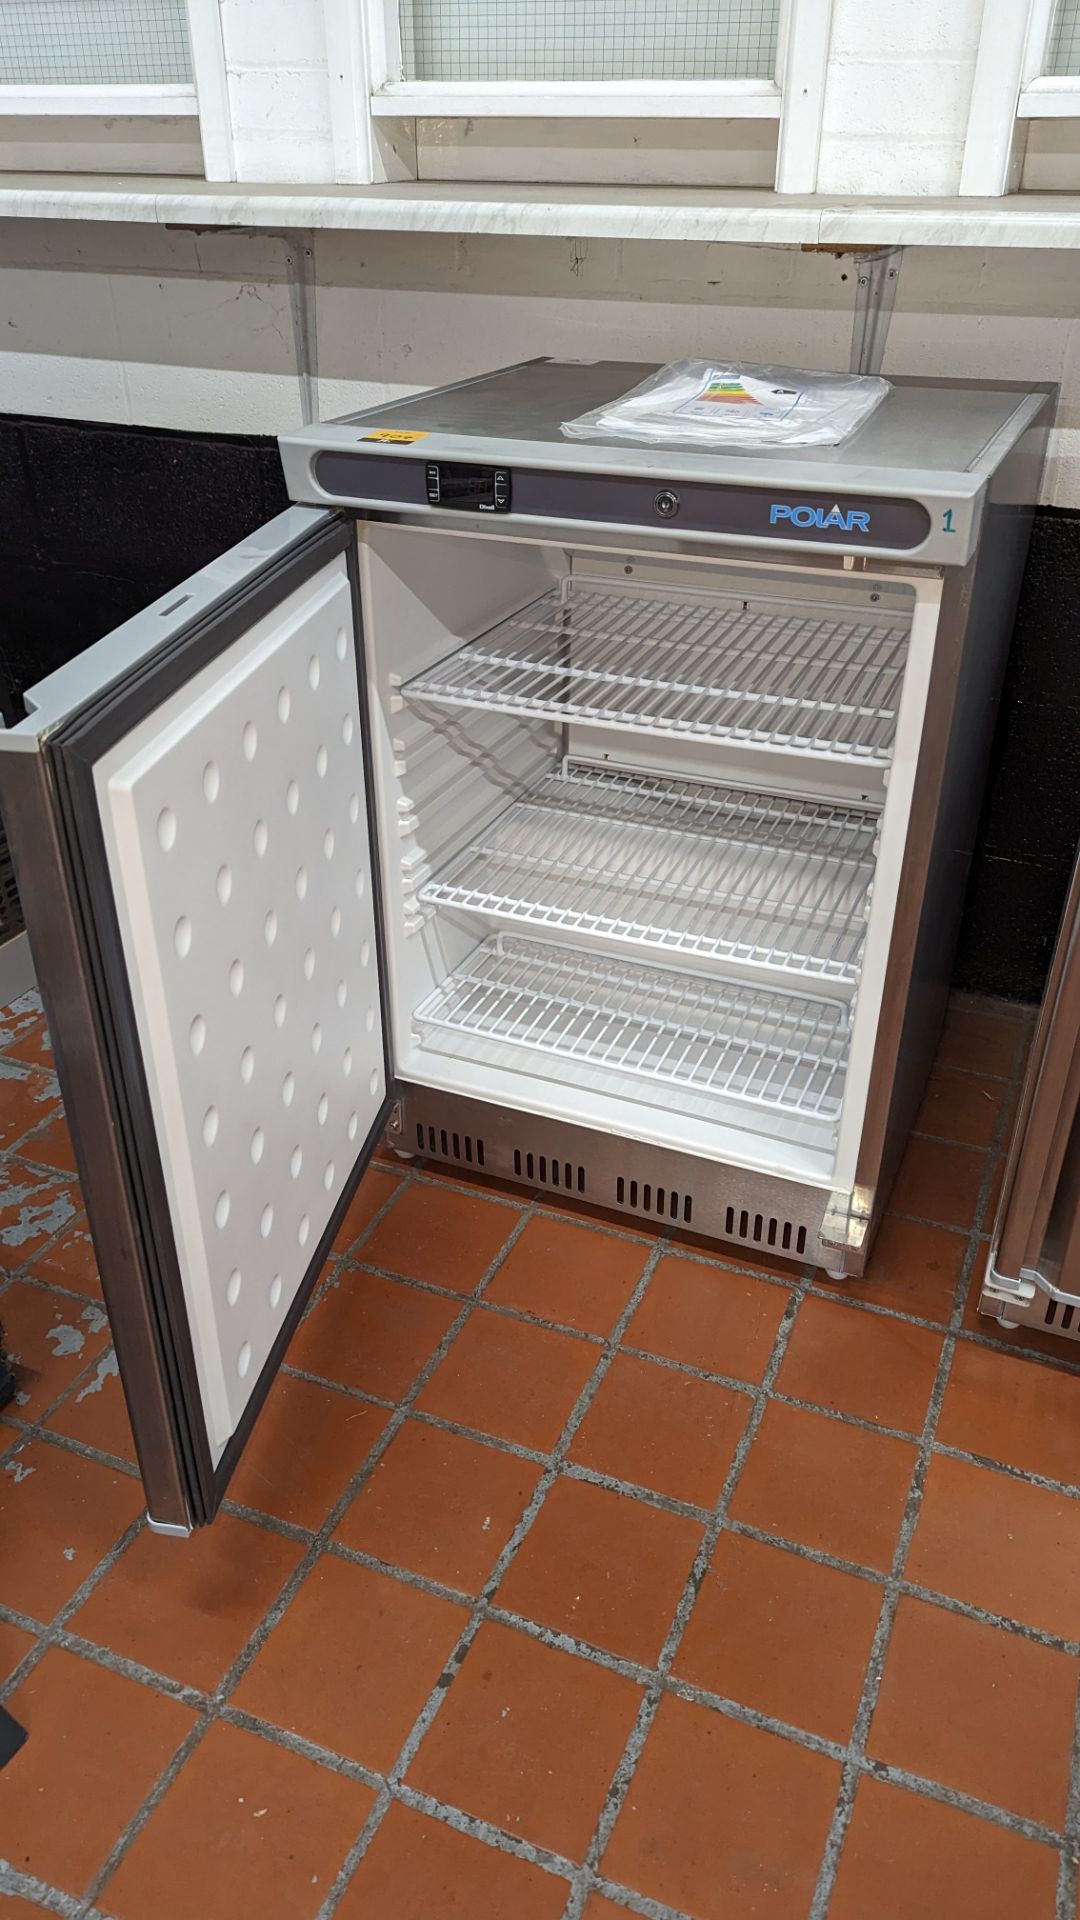 Polar CD080 150 litre stainless steel under counter fridge, including manual - Image 4 of 6